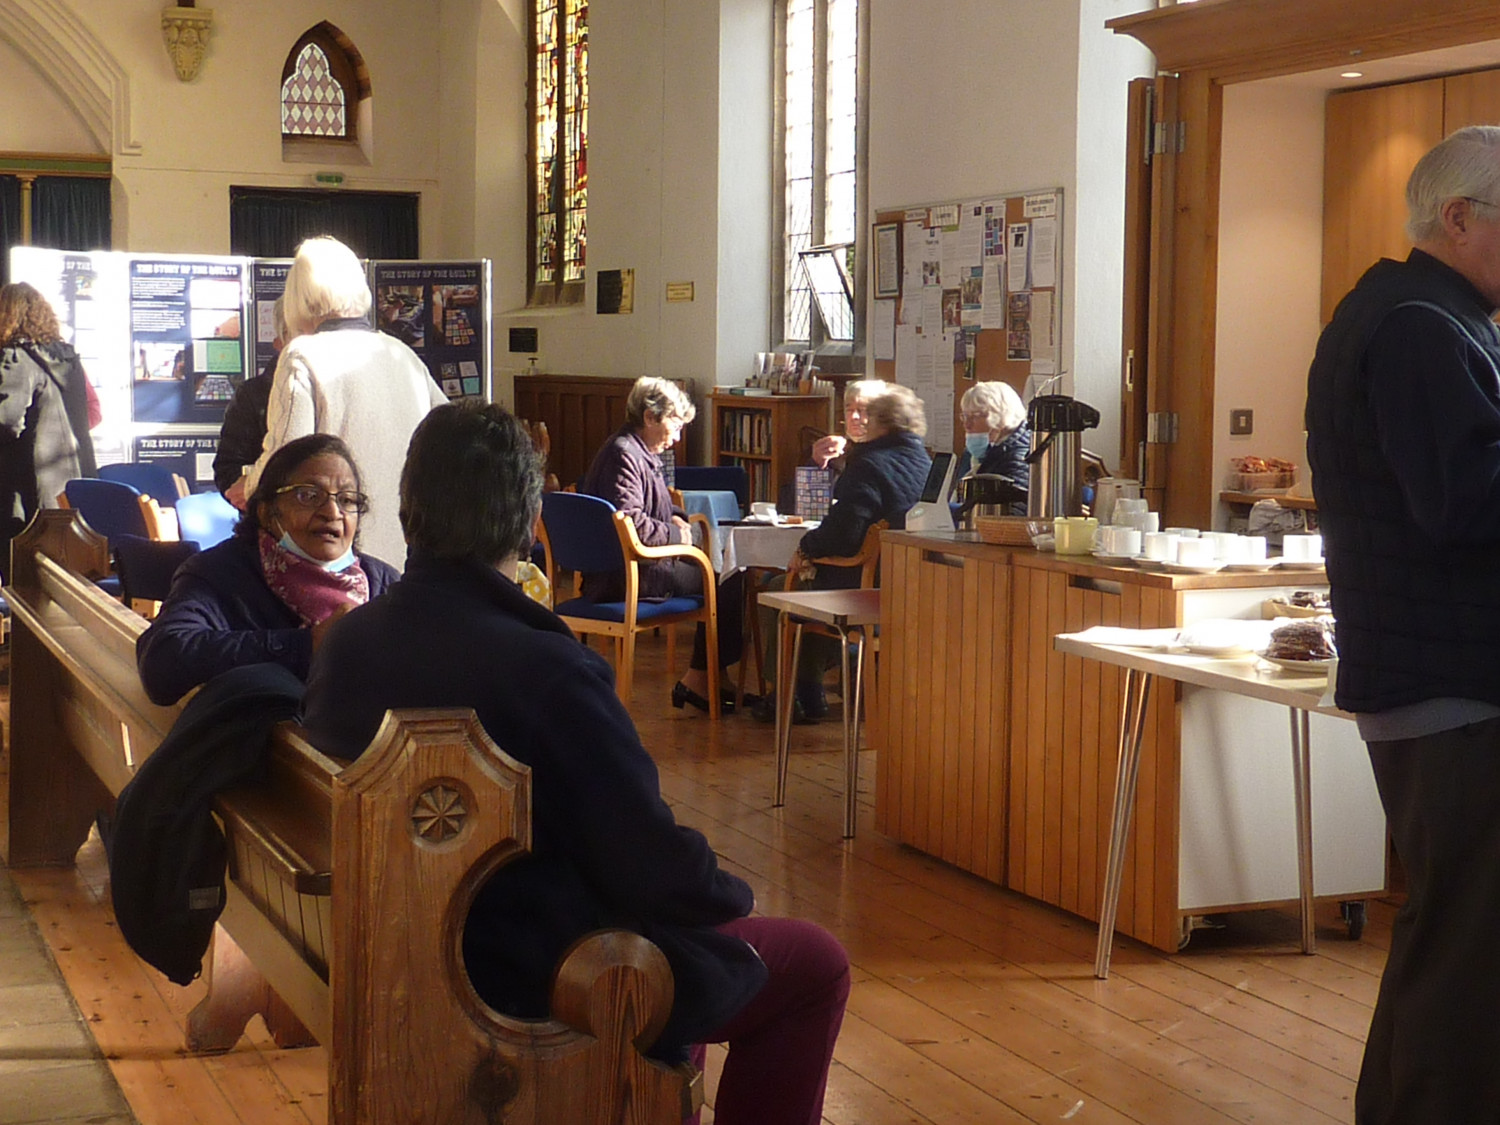 People sitting having refreshments in a church